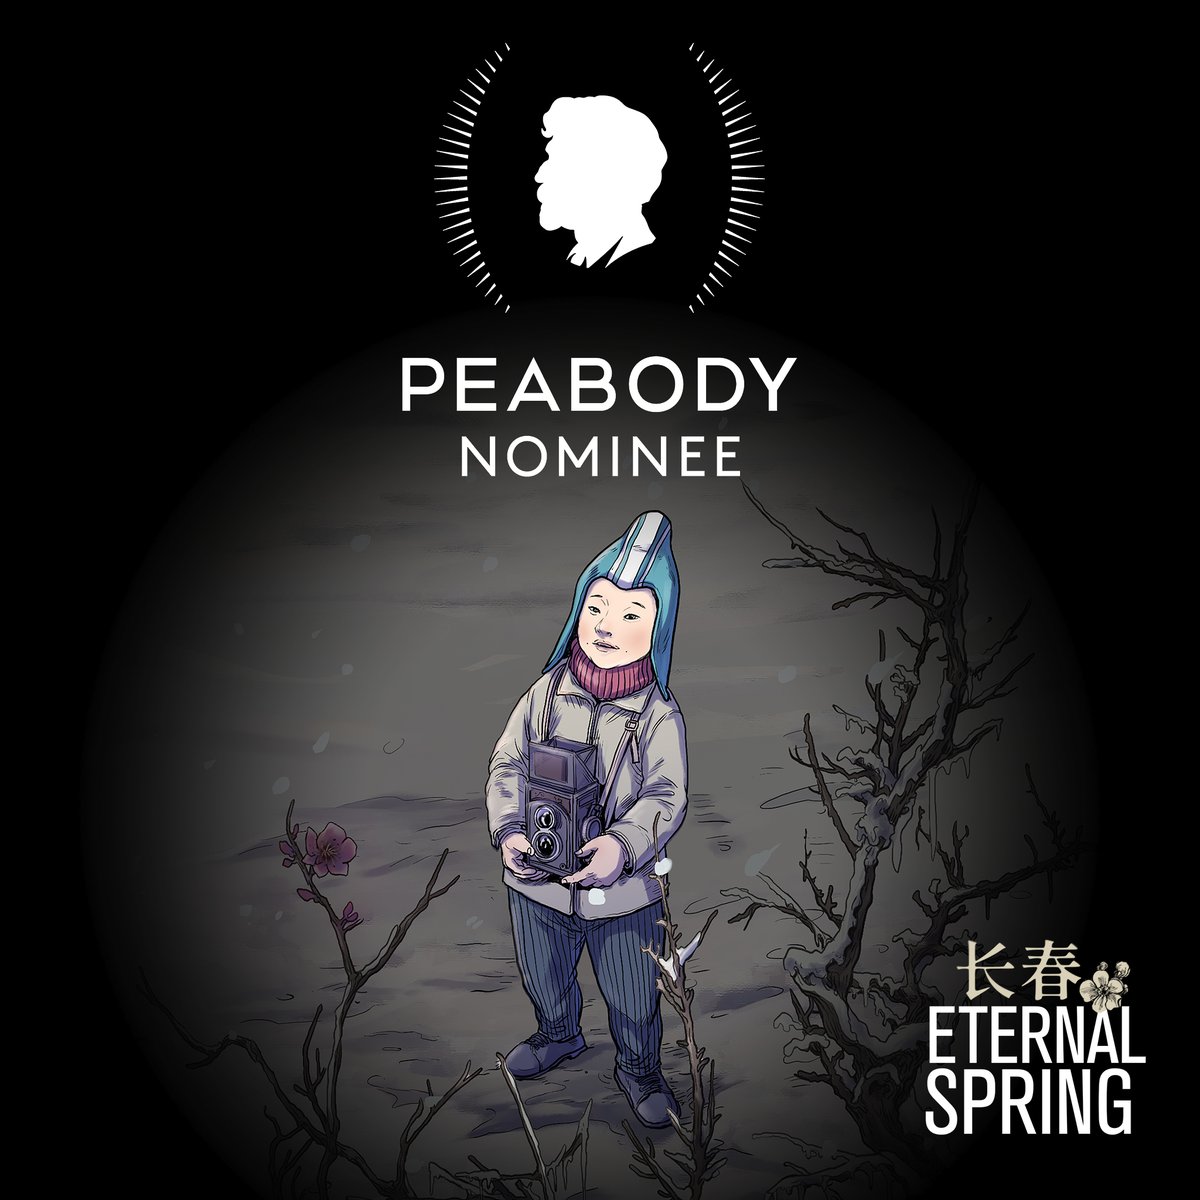 The Eternal Spring (長春) team is THRILLED to be named a #PeabodyNominee! The prestigious @PeabodyAwards represents #StoriesThatMatter and we're honored to be recognized amongst the very best in storytelling. bit.ly/PeabodyNominees #PeabodyAwards @JasonLoftus